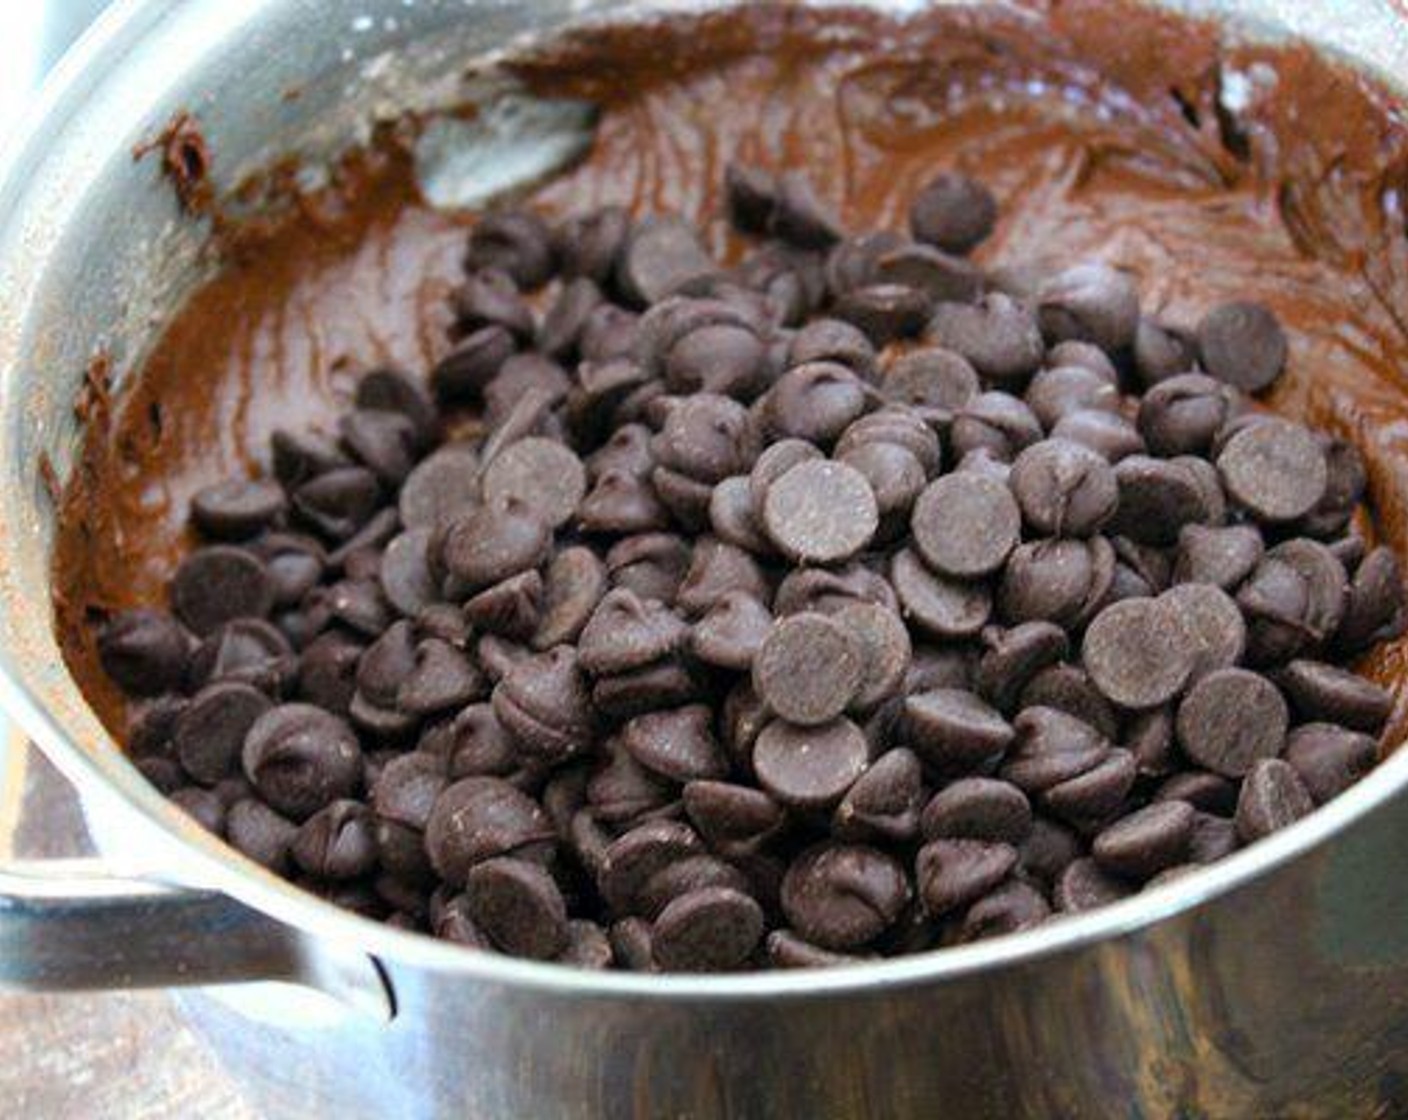 step 5 Add the All-Purpose Flour (1 1/2 cups), Unsweetened Cocoa Powder (1 cup), Baking Powder (1 tsp), and Salt (1/4 tsp). Stir well, then fold in the Semi-Sweet Chocolate Chips (2 cups).